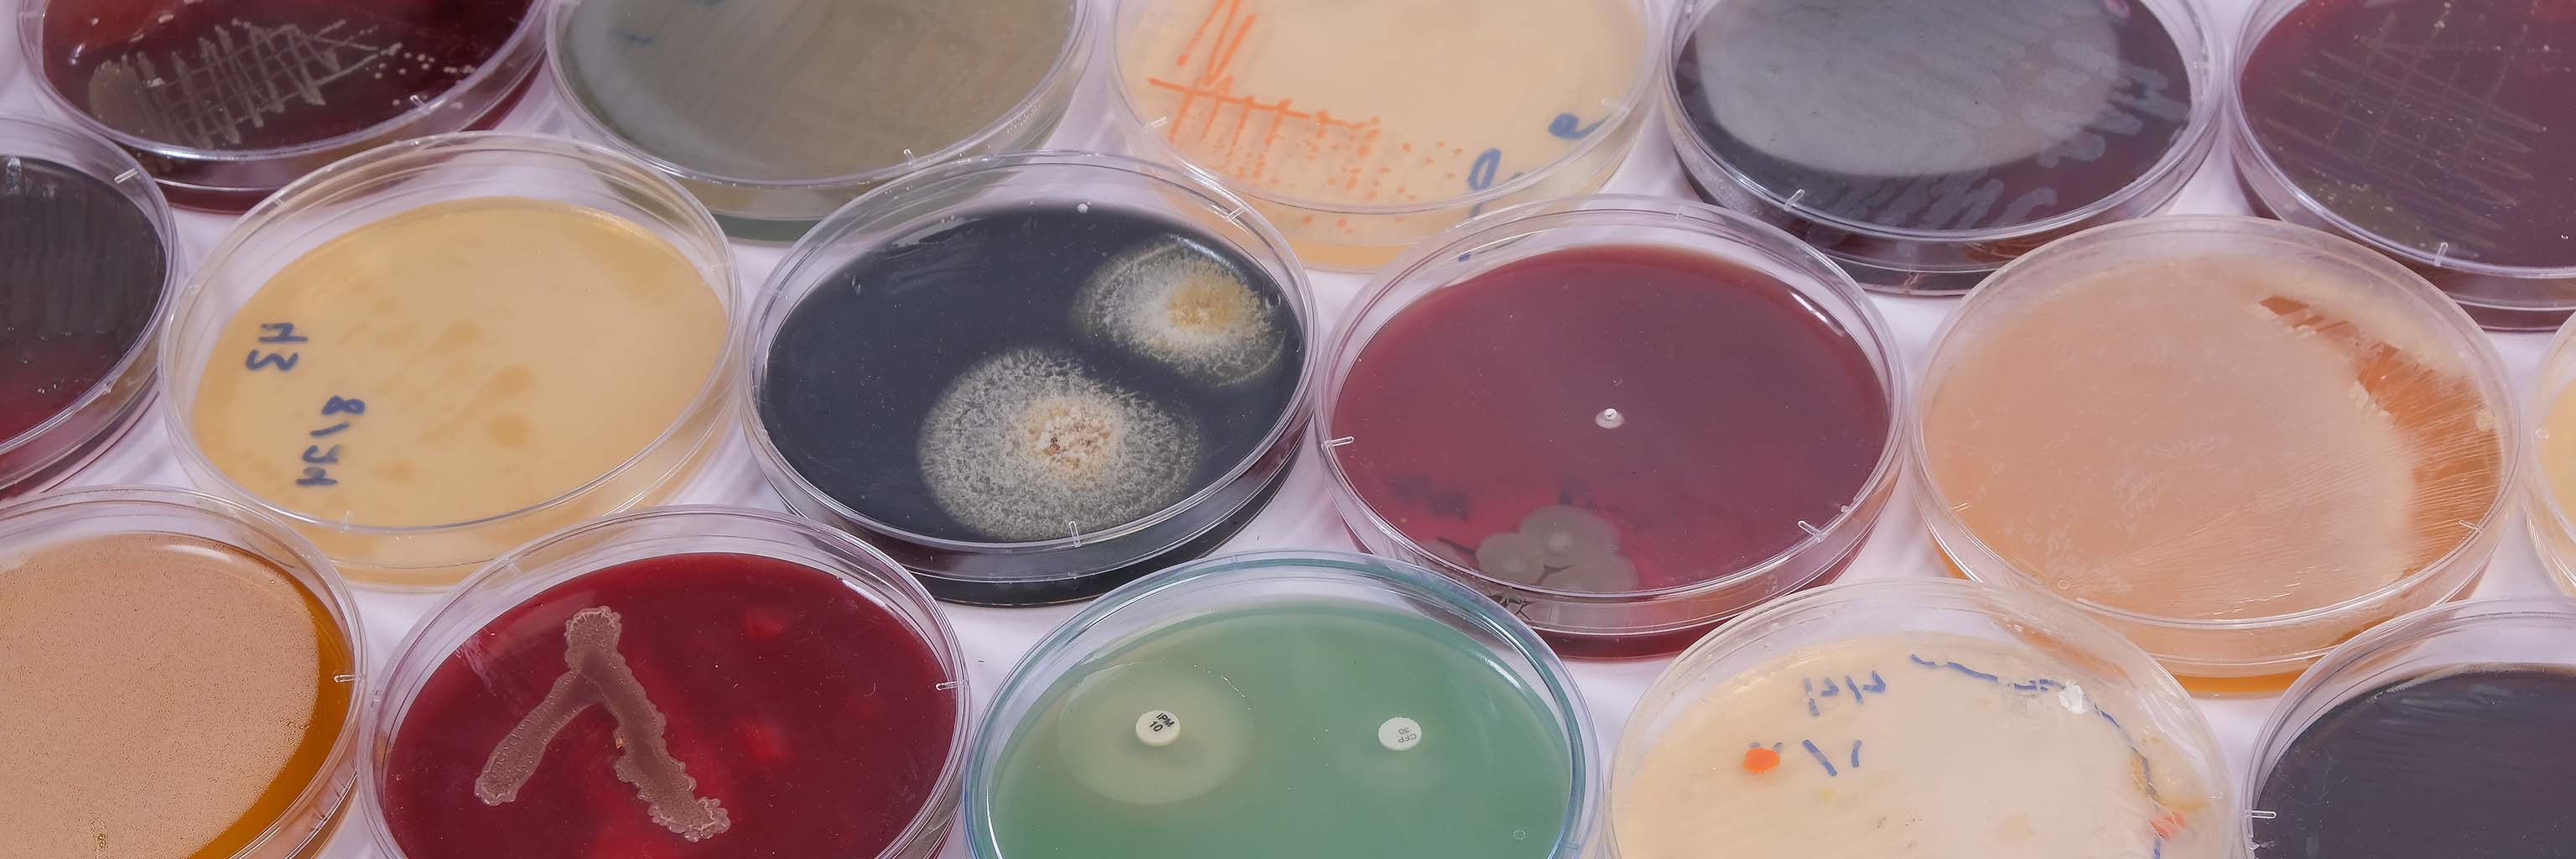 Collection of culture plates containing growth of microorganisms on different agar media.